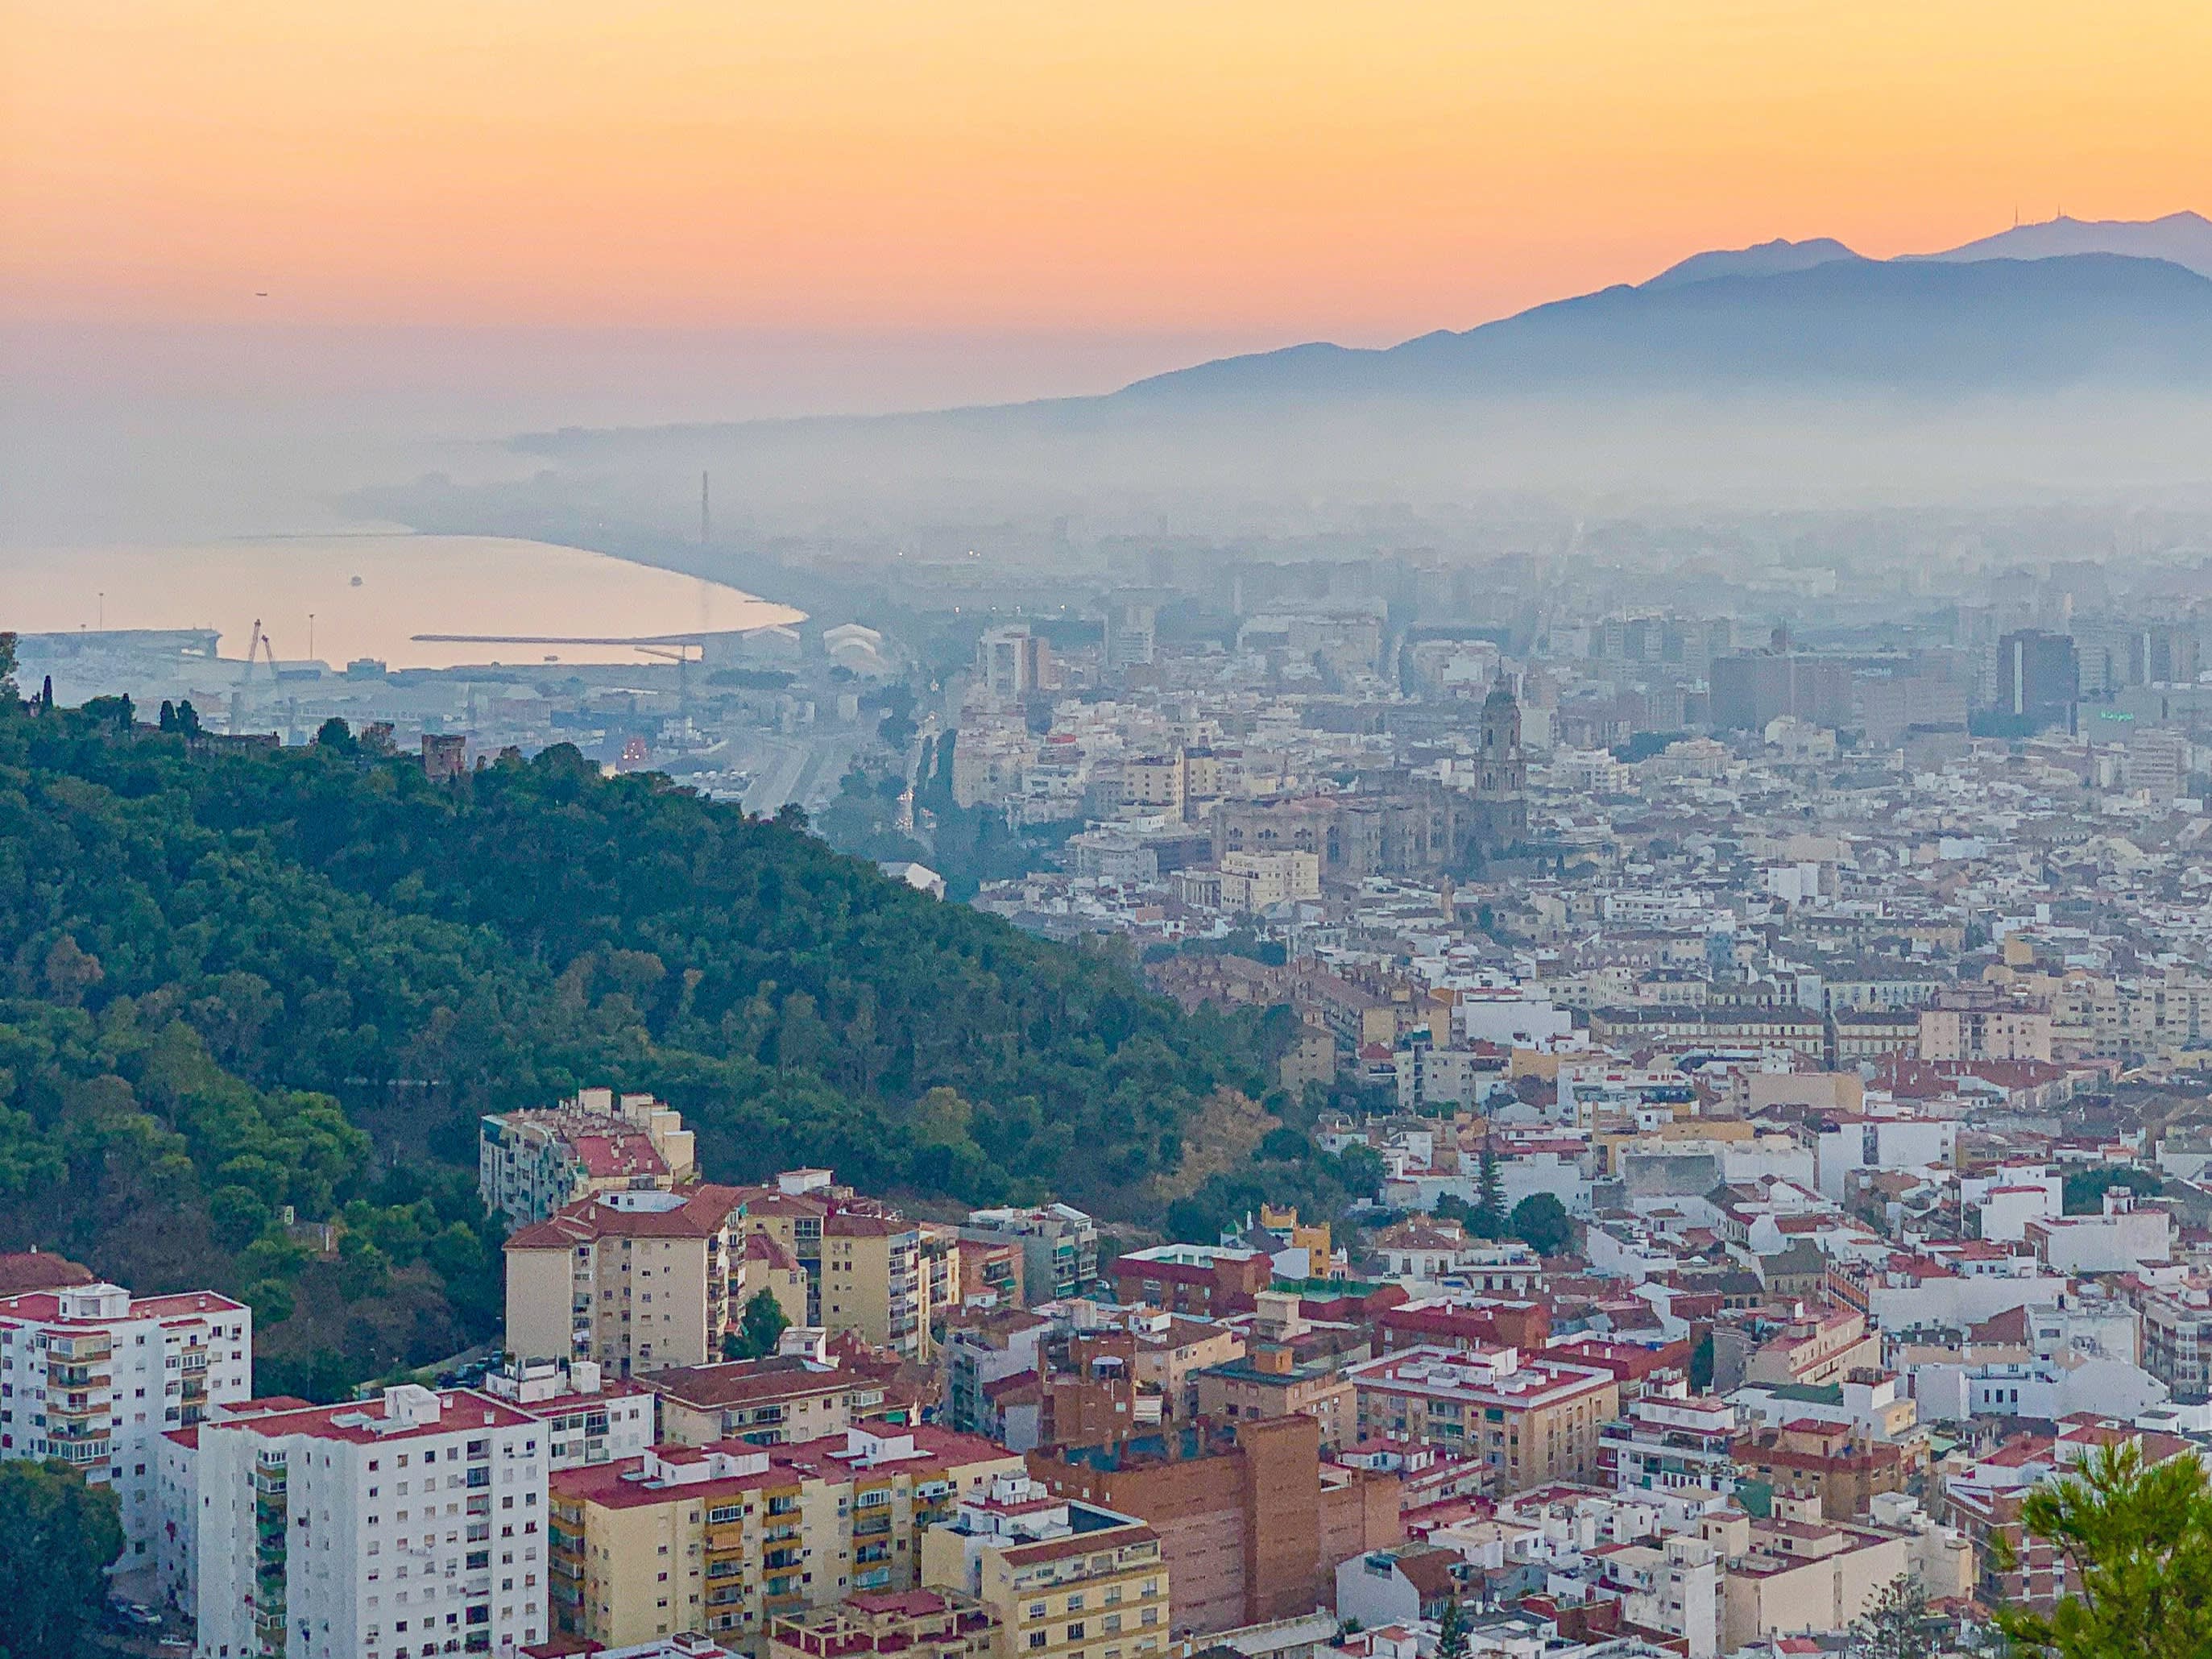 Birdseye view picture of Málaga at sunset